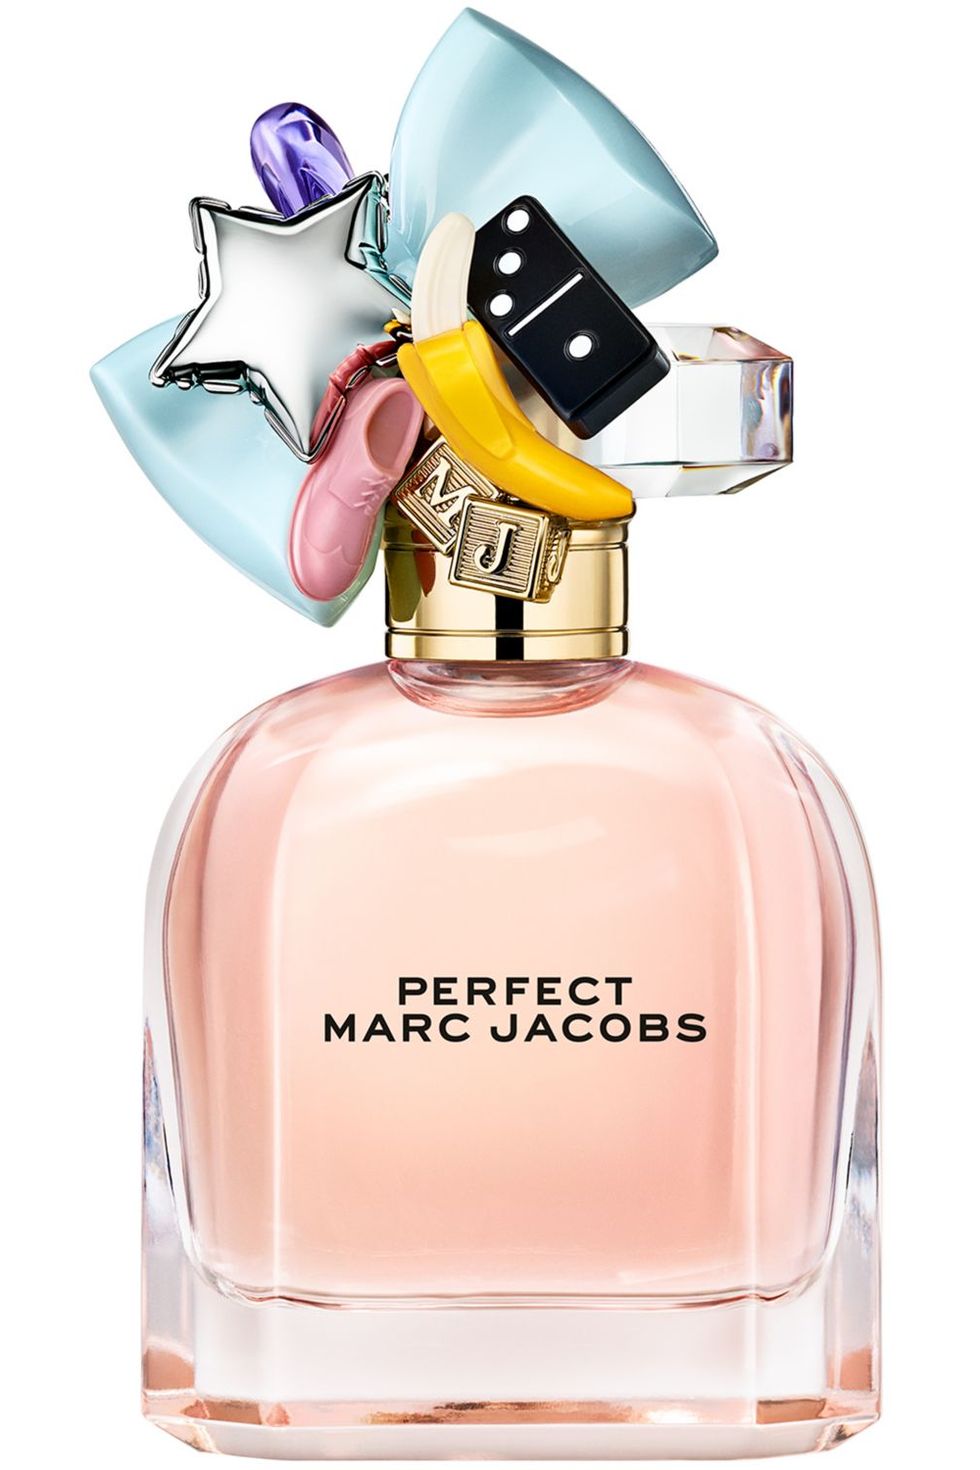 Marc Jacobs Perfect Interview Perfume Review - Marc Jacobs New ...